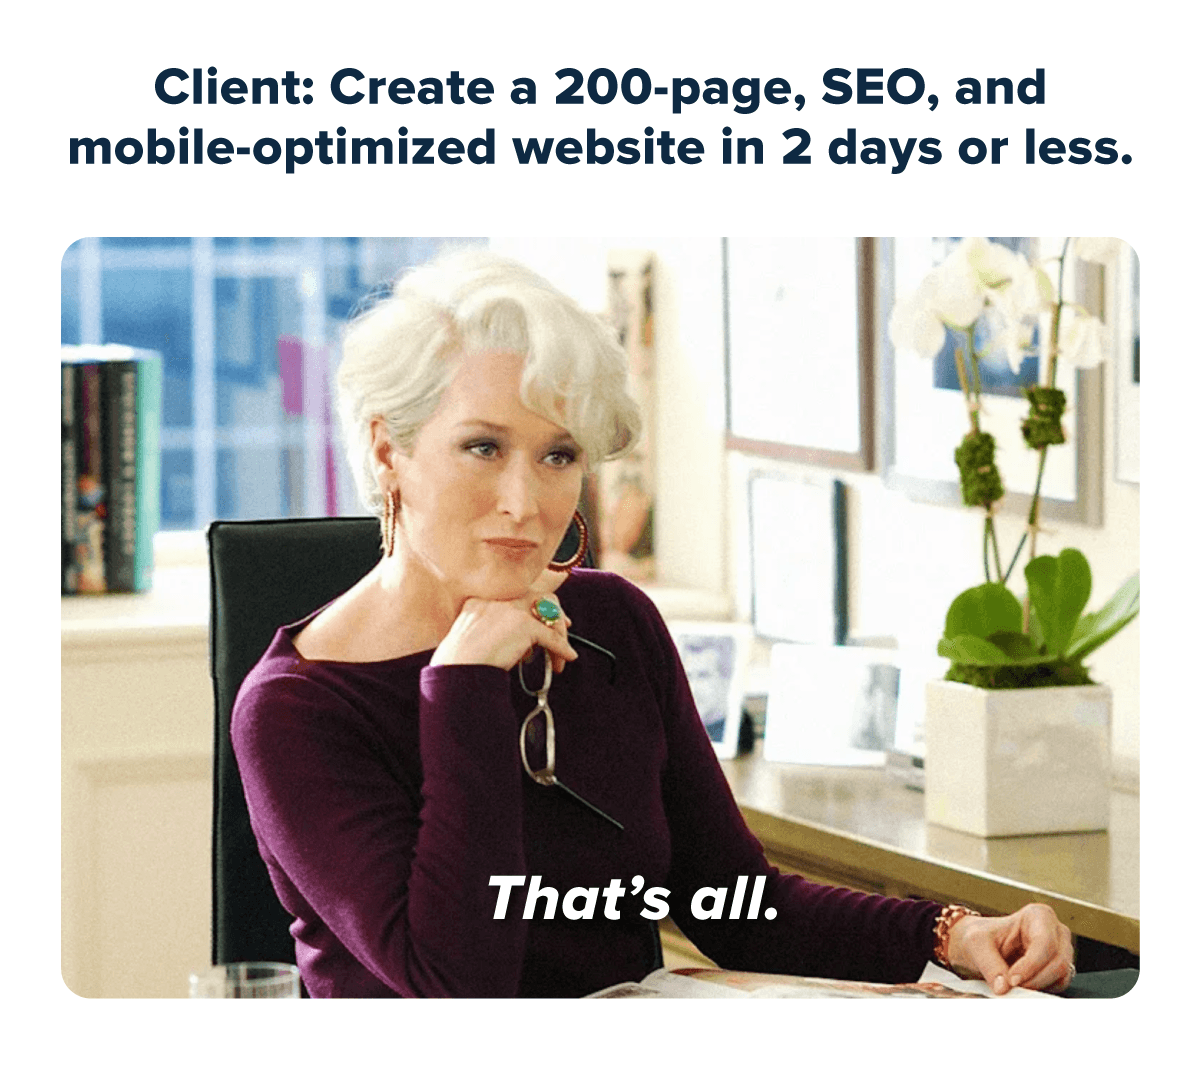 A marketing meme about unreasonable client requests based on the Devil Wears Prada "That's All" scene.